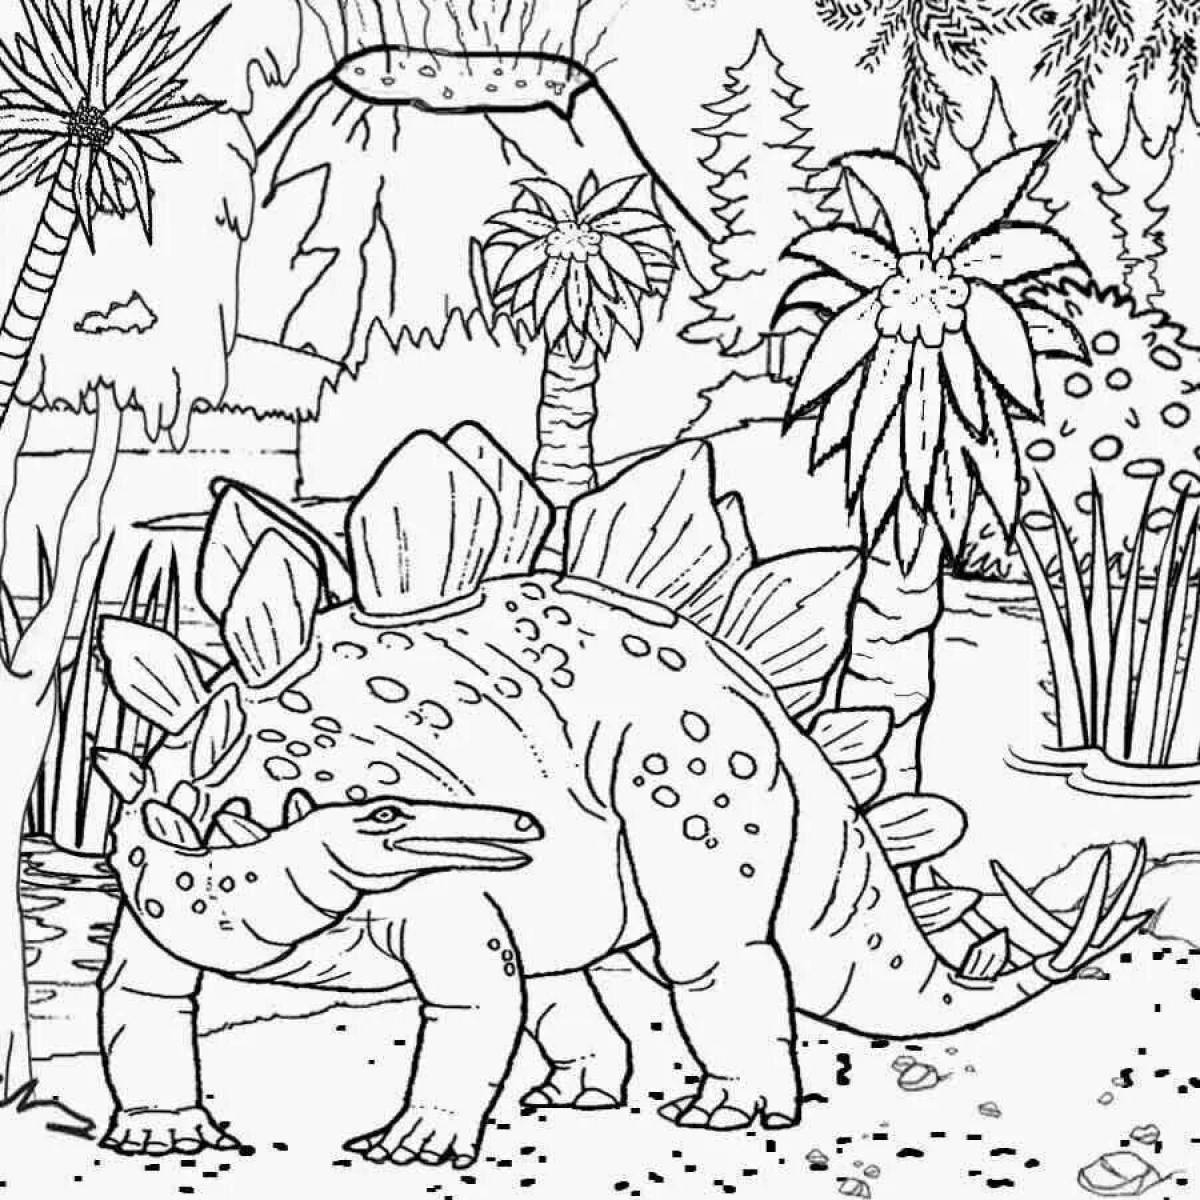 Dinosaur coloring book for boys 7 years old